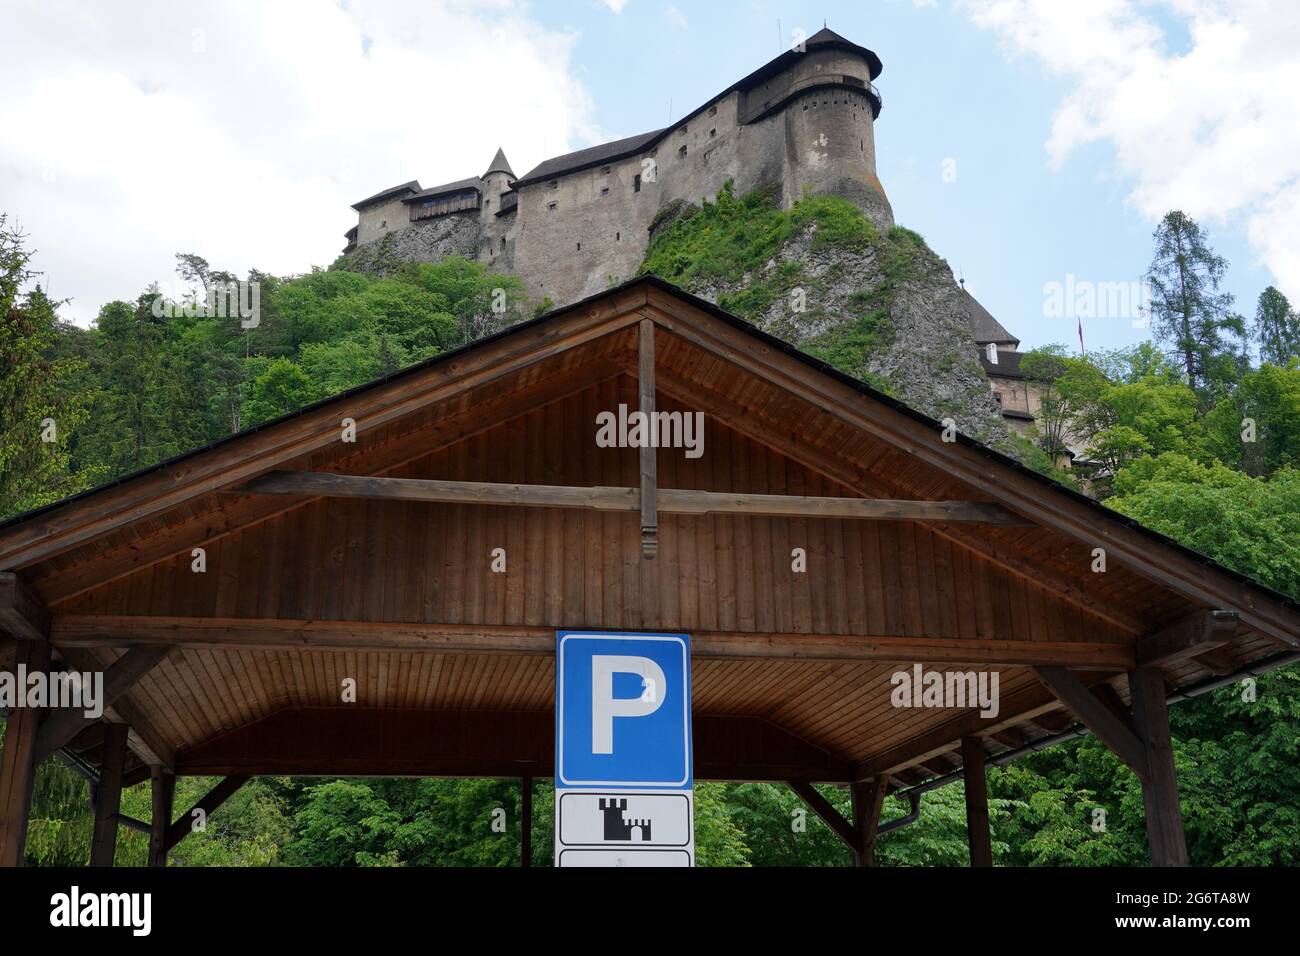 Parking booth made of wood with traffic sign for parking in area around Orava castle in Slovakia. Low angle view with the silhouette of a castle. Stock Photo